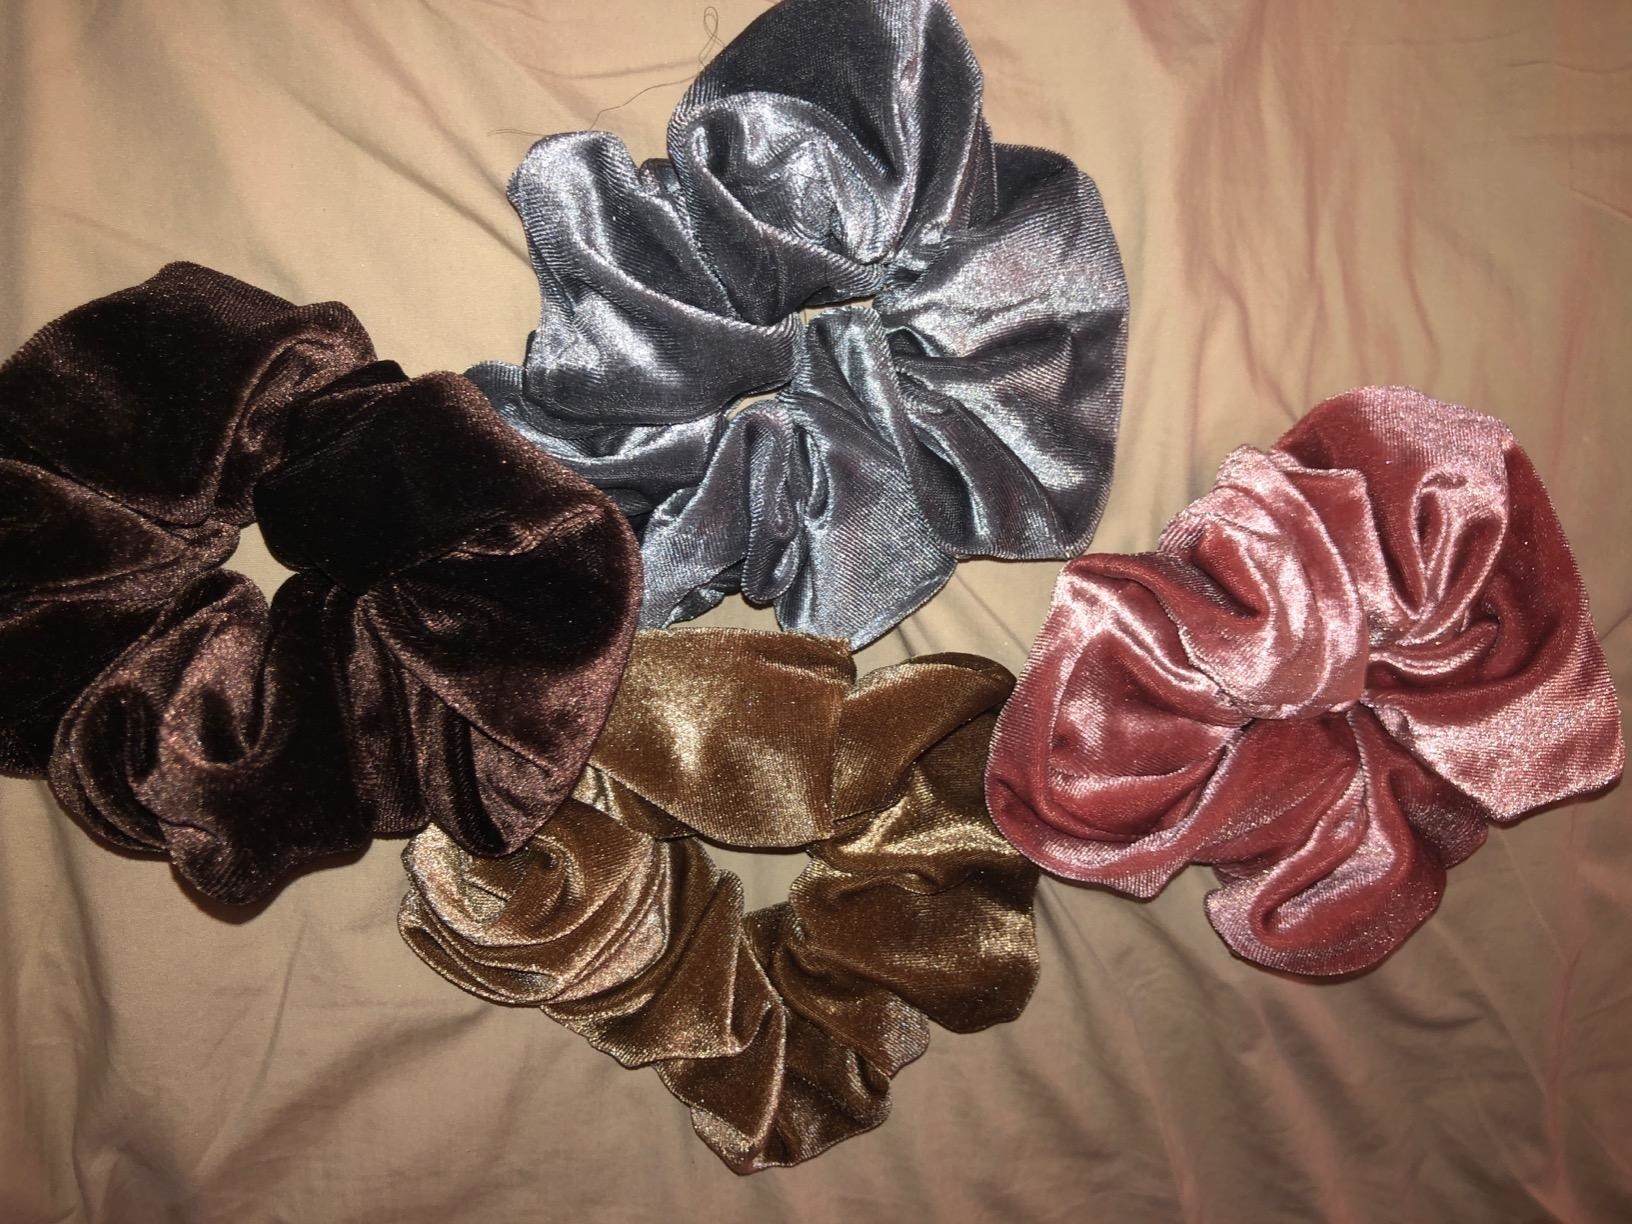 the four scrunchies in brown, tan, blue, and pink against a tan background